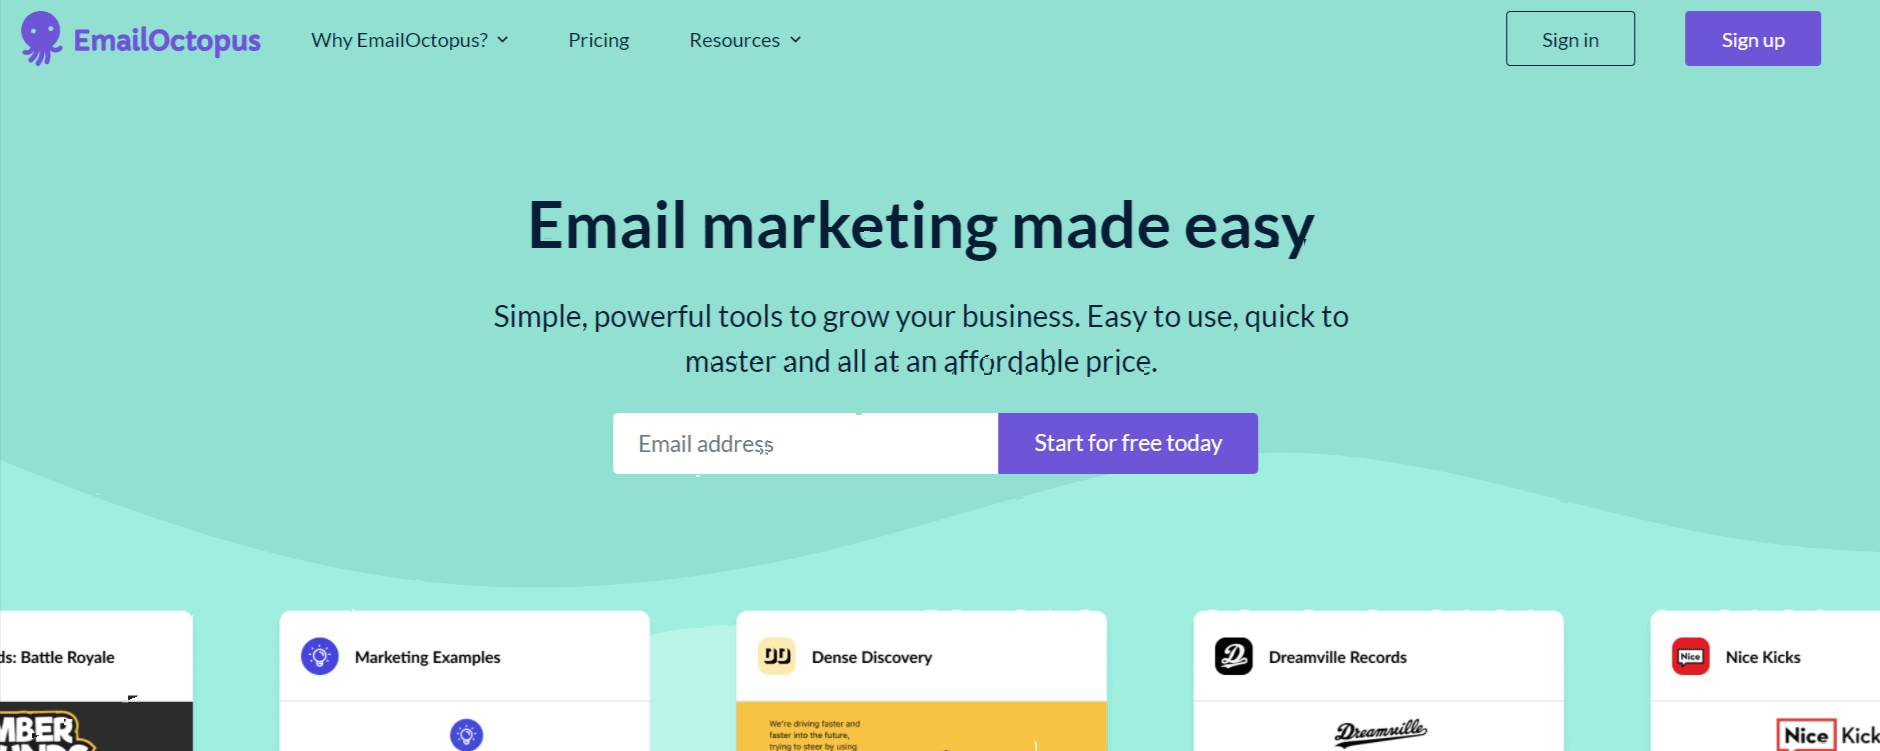 EmailOctopus Review- Overview